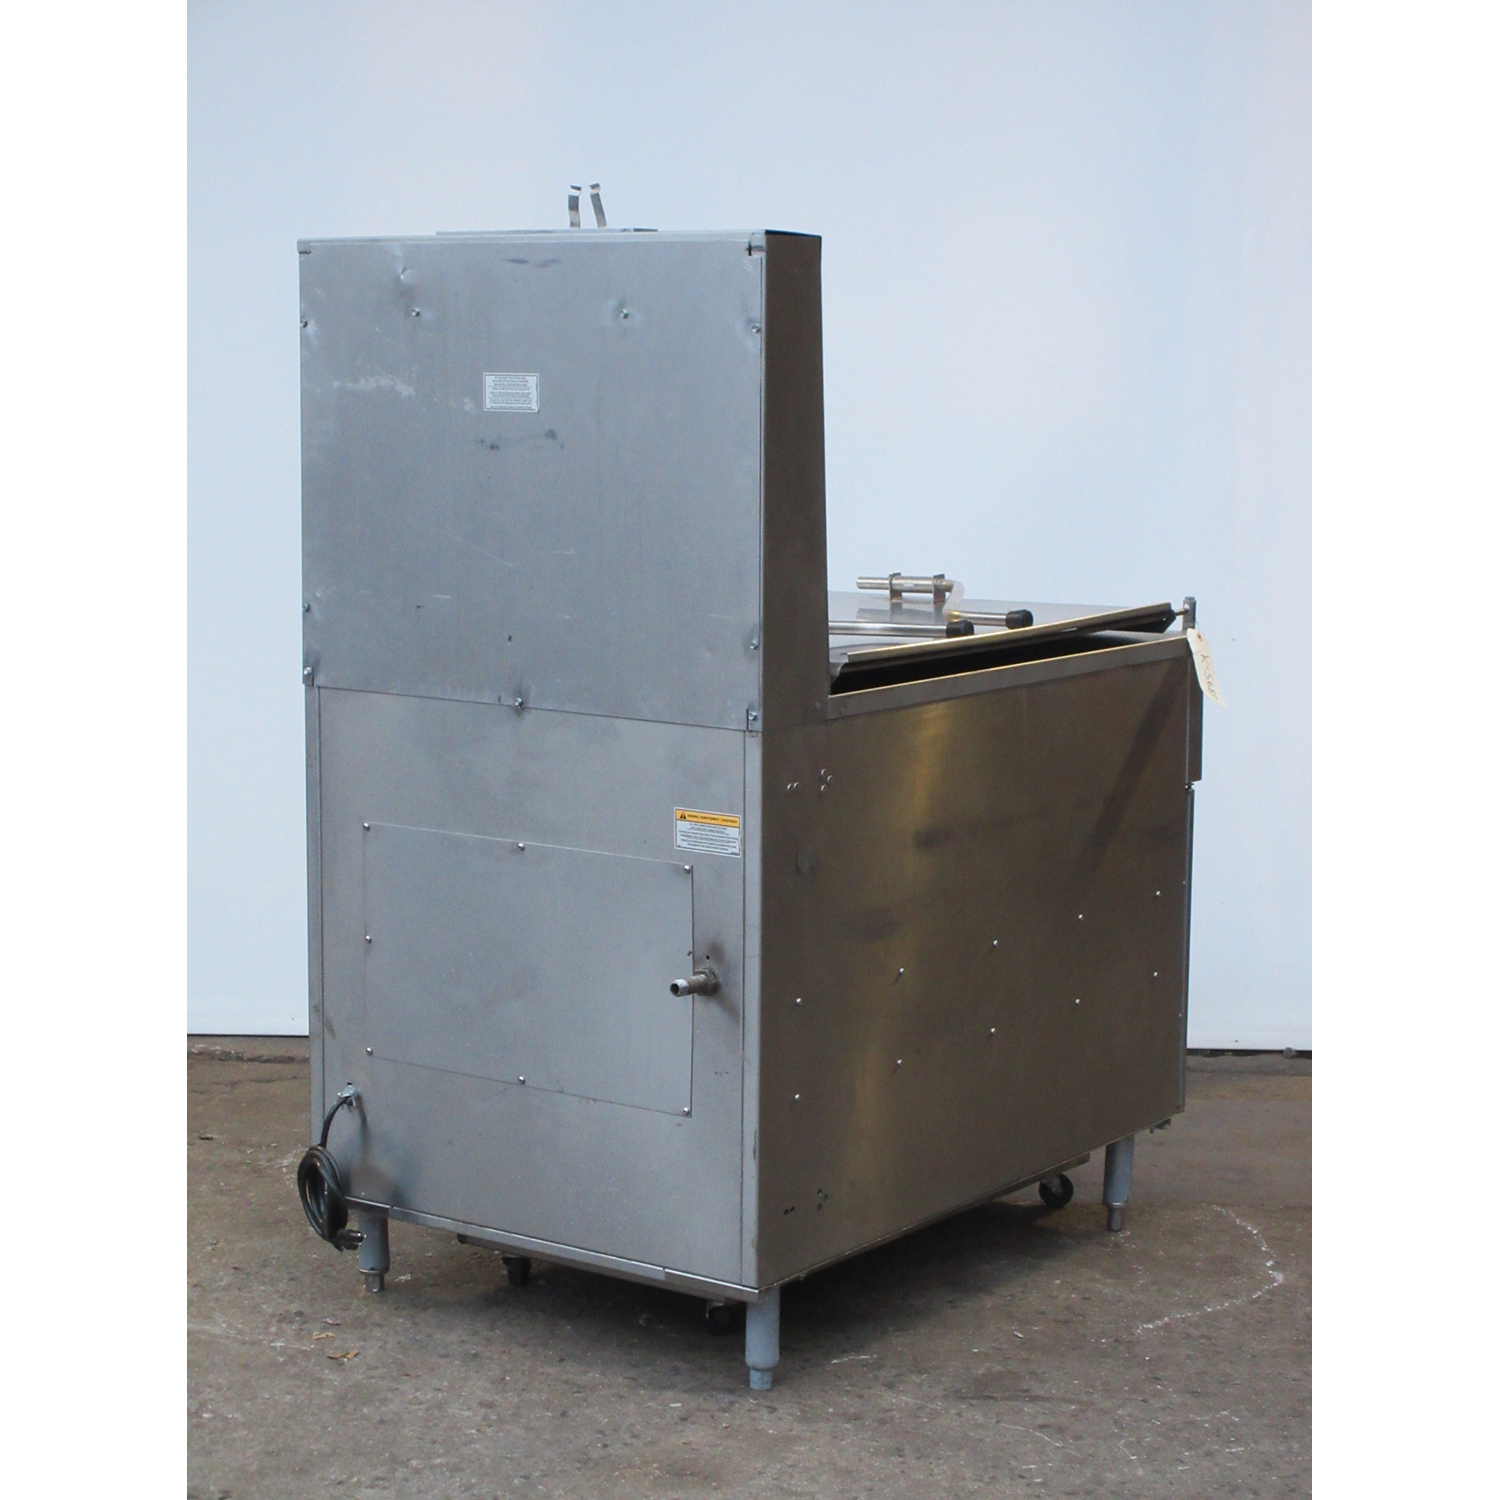 Pitco DD24RUFM Gas Donut Fryer with Oil Filter, Used Excellent Condition image 4